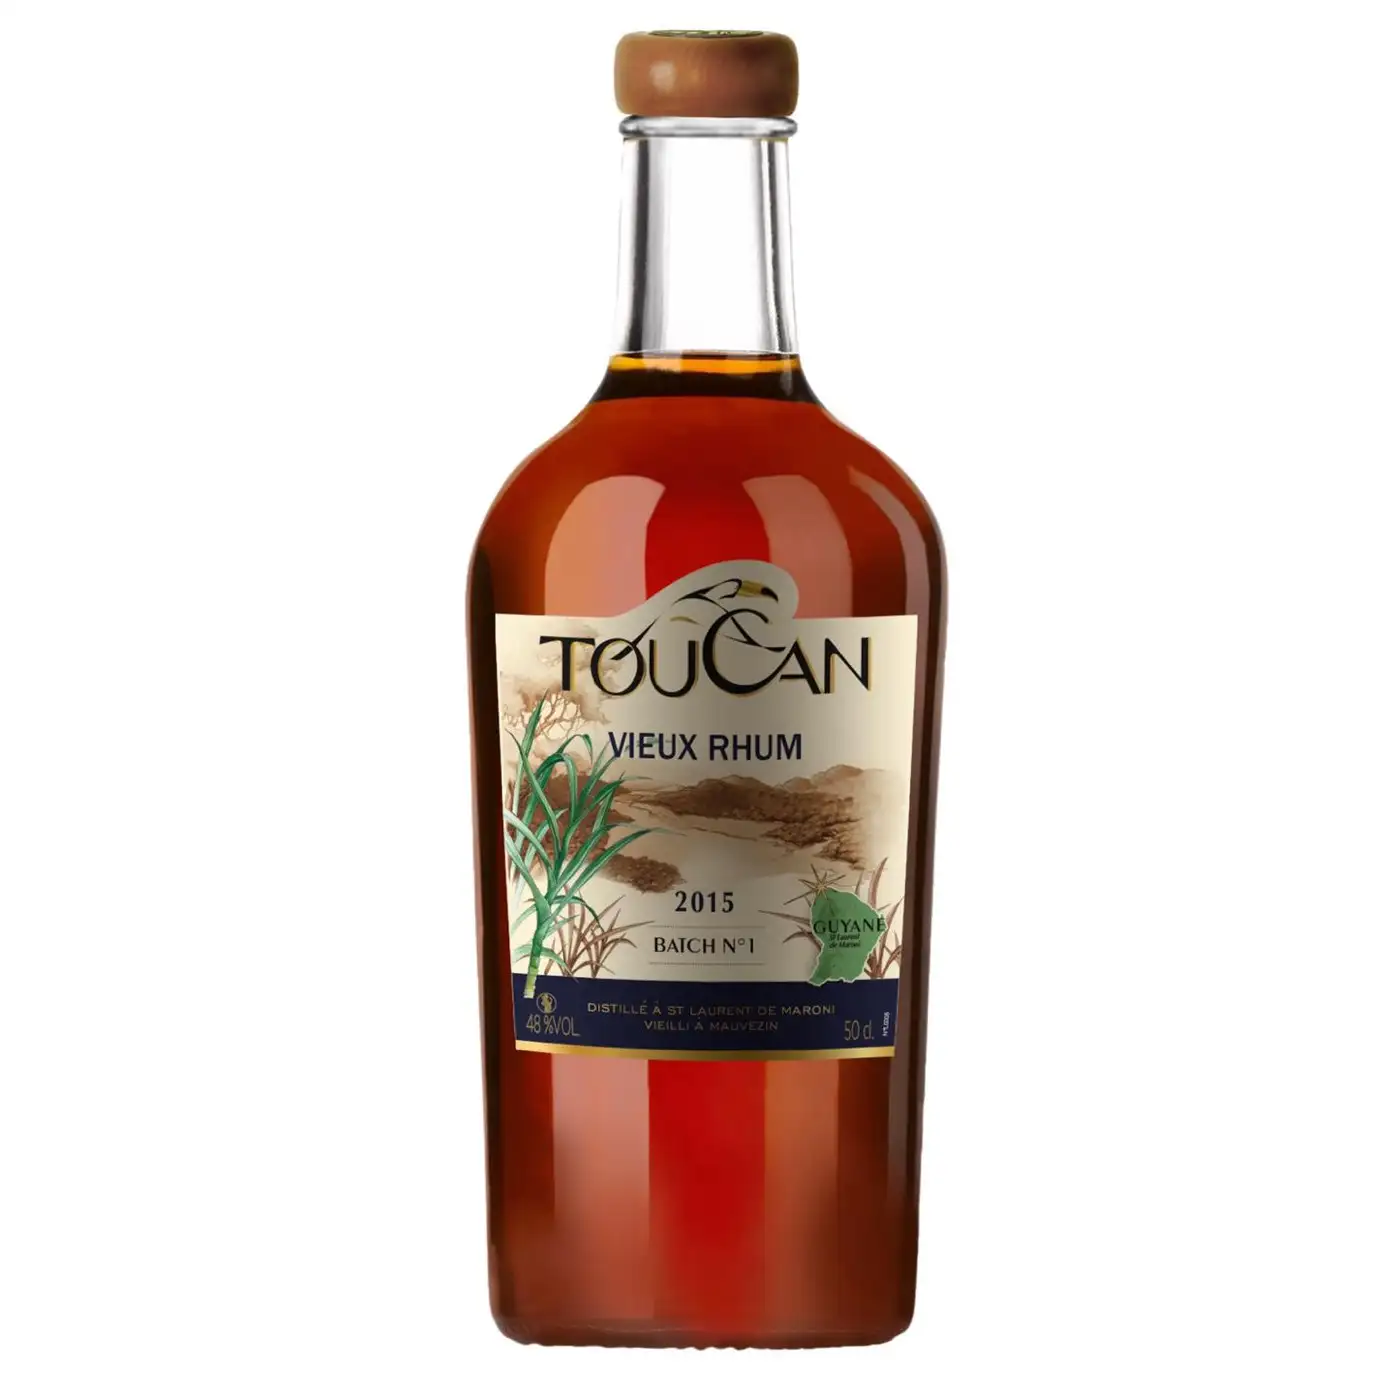 Image of the front of the bottle of the rum Vieux Rhum